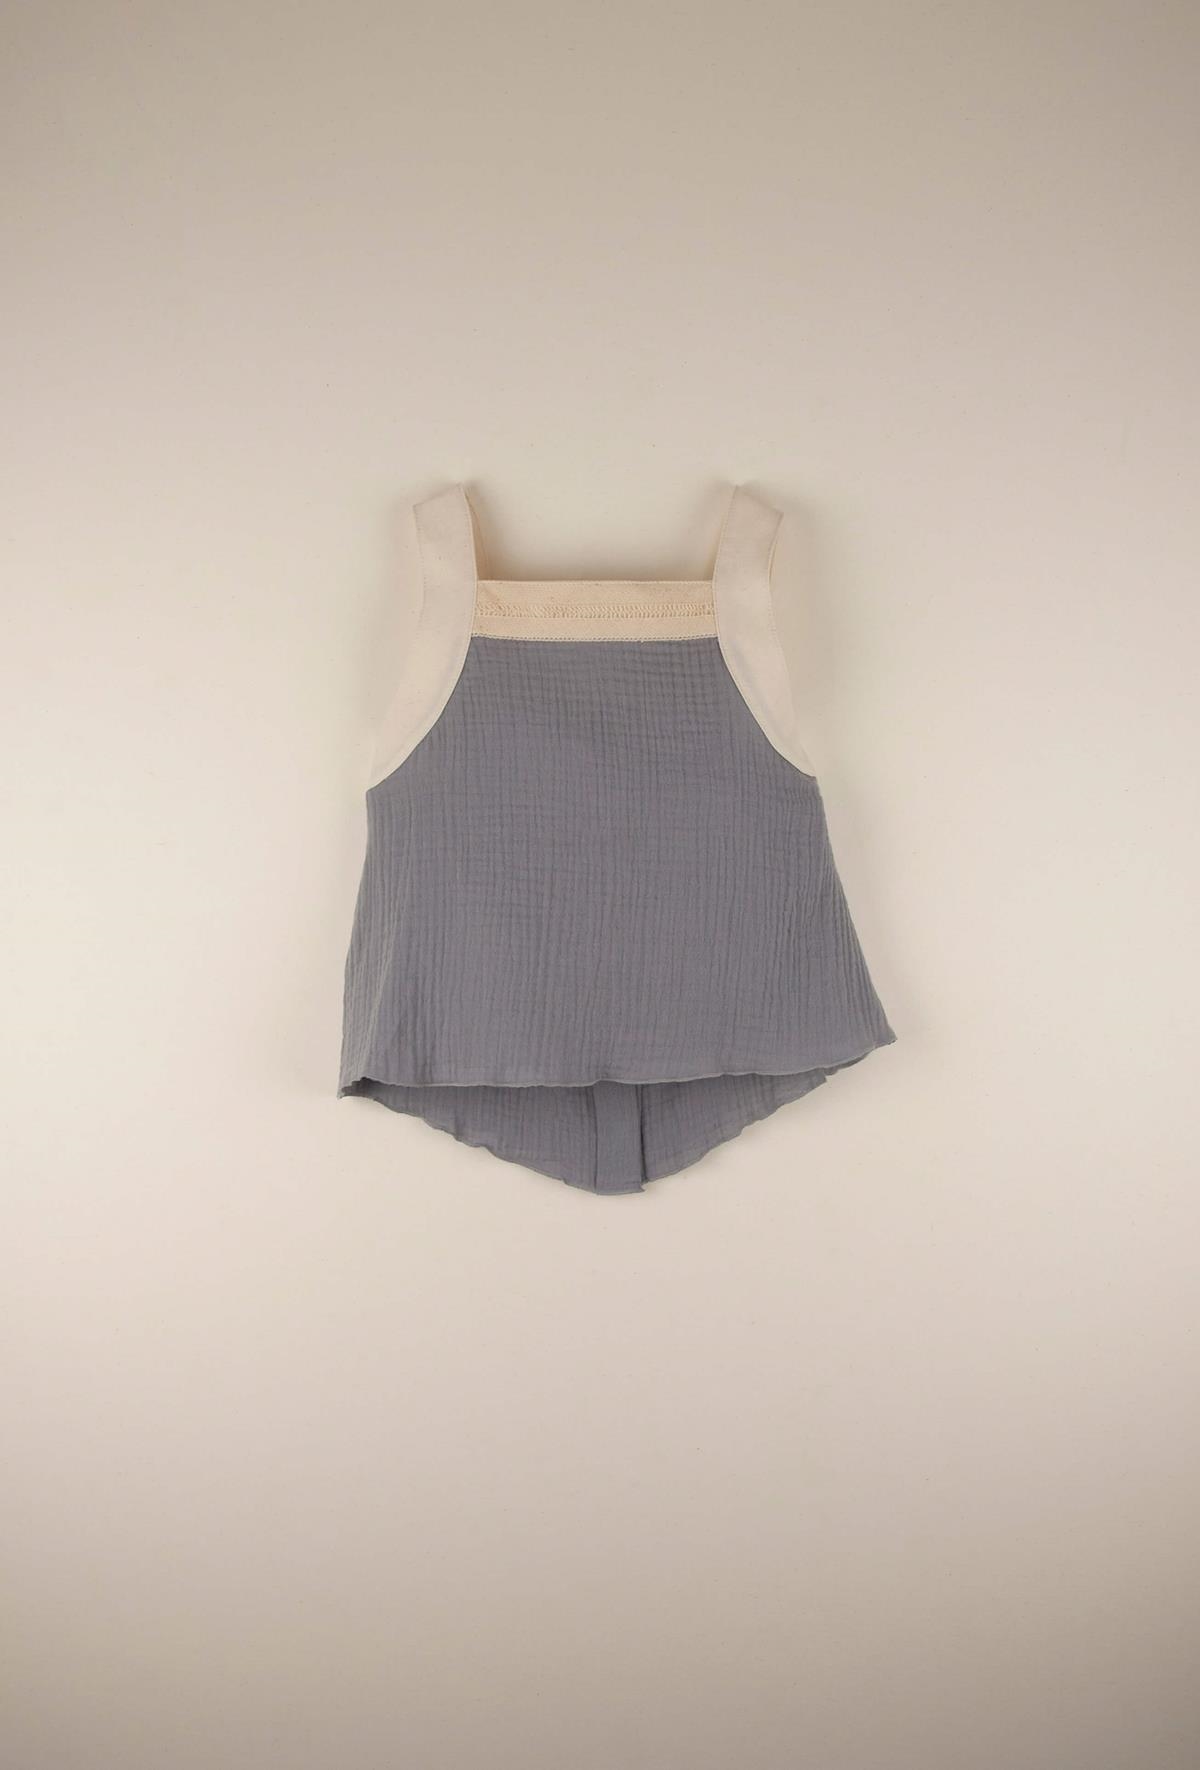 Mod.19.3 Greyish-blue organic blouse with straps | SS22 Mod.19.3 Greyish-blue organic blouse with straps | 1